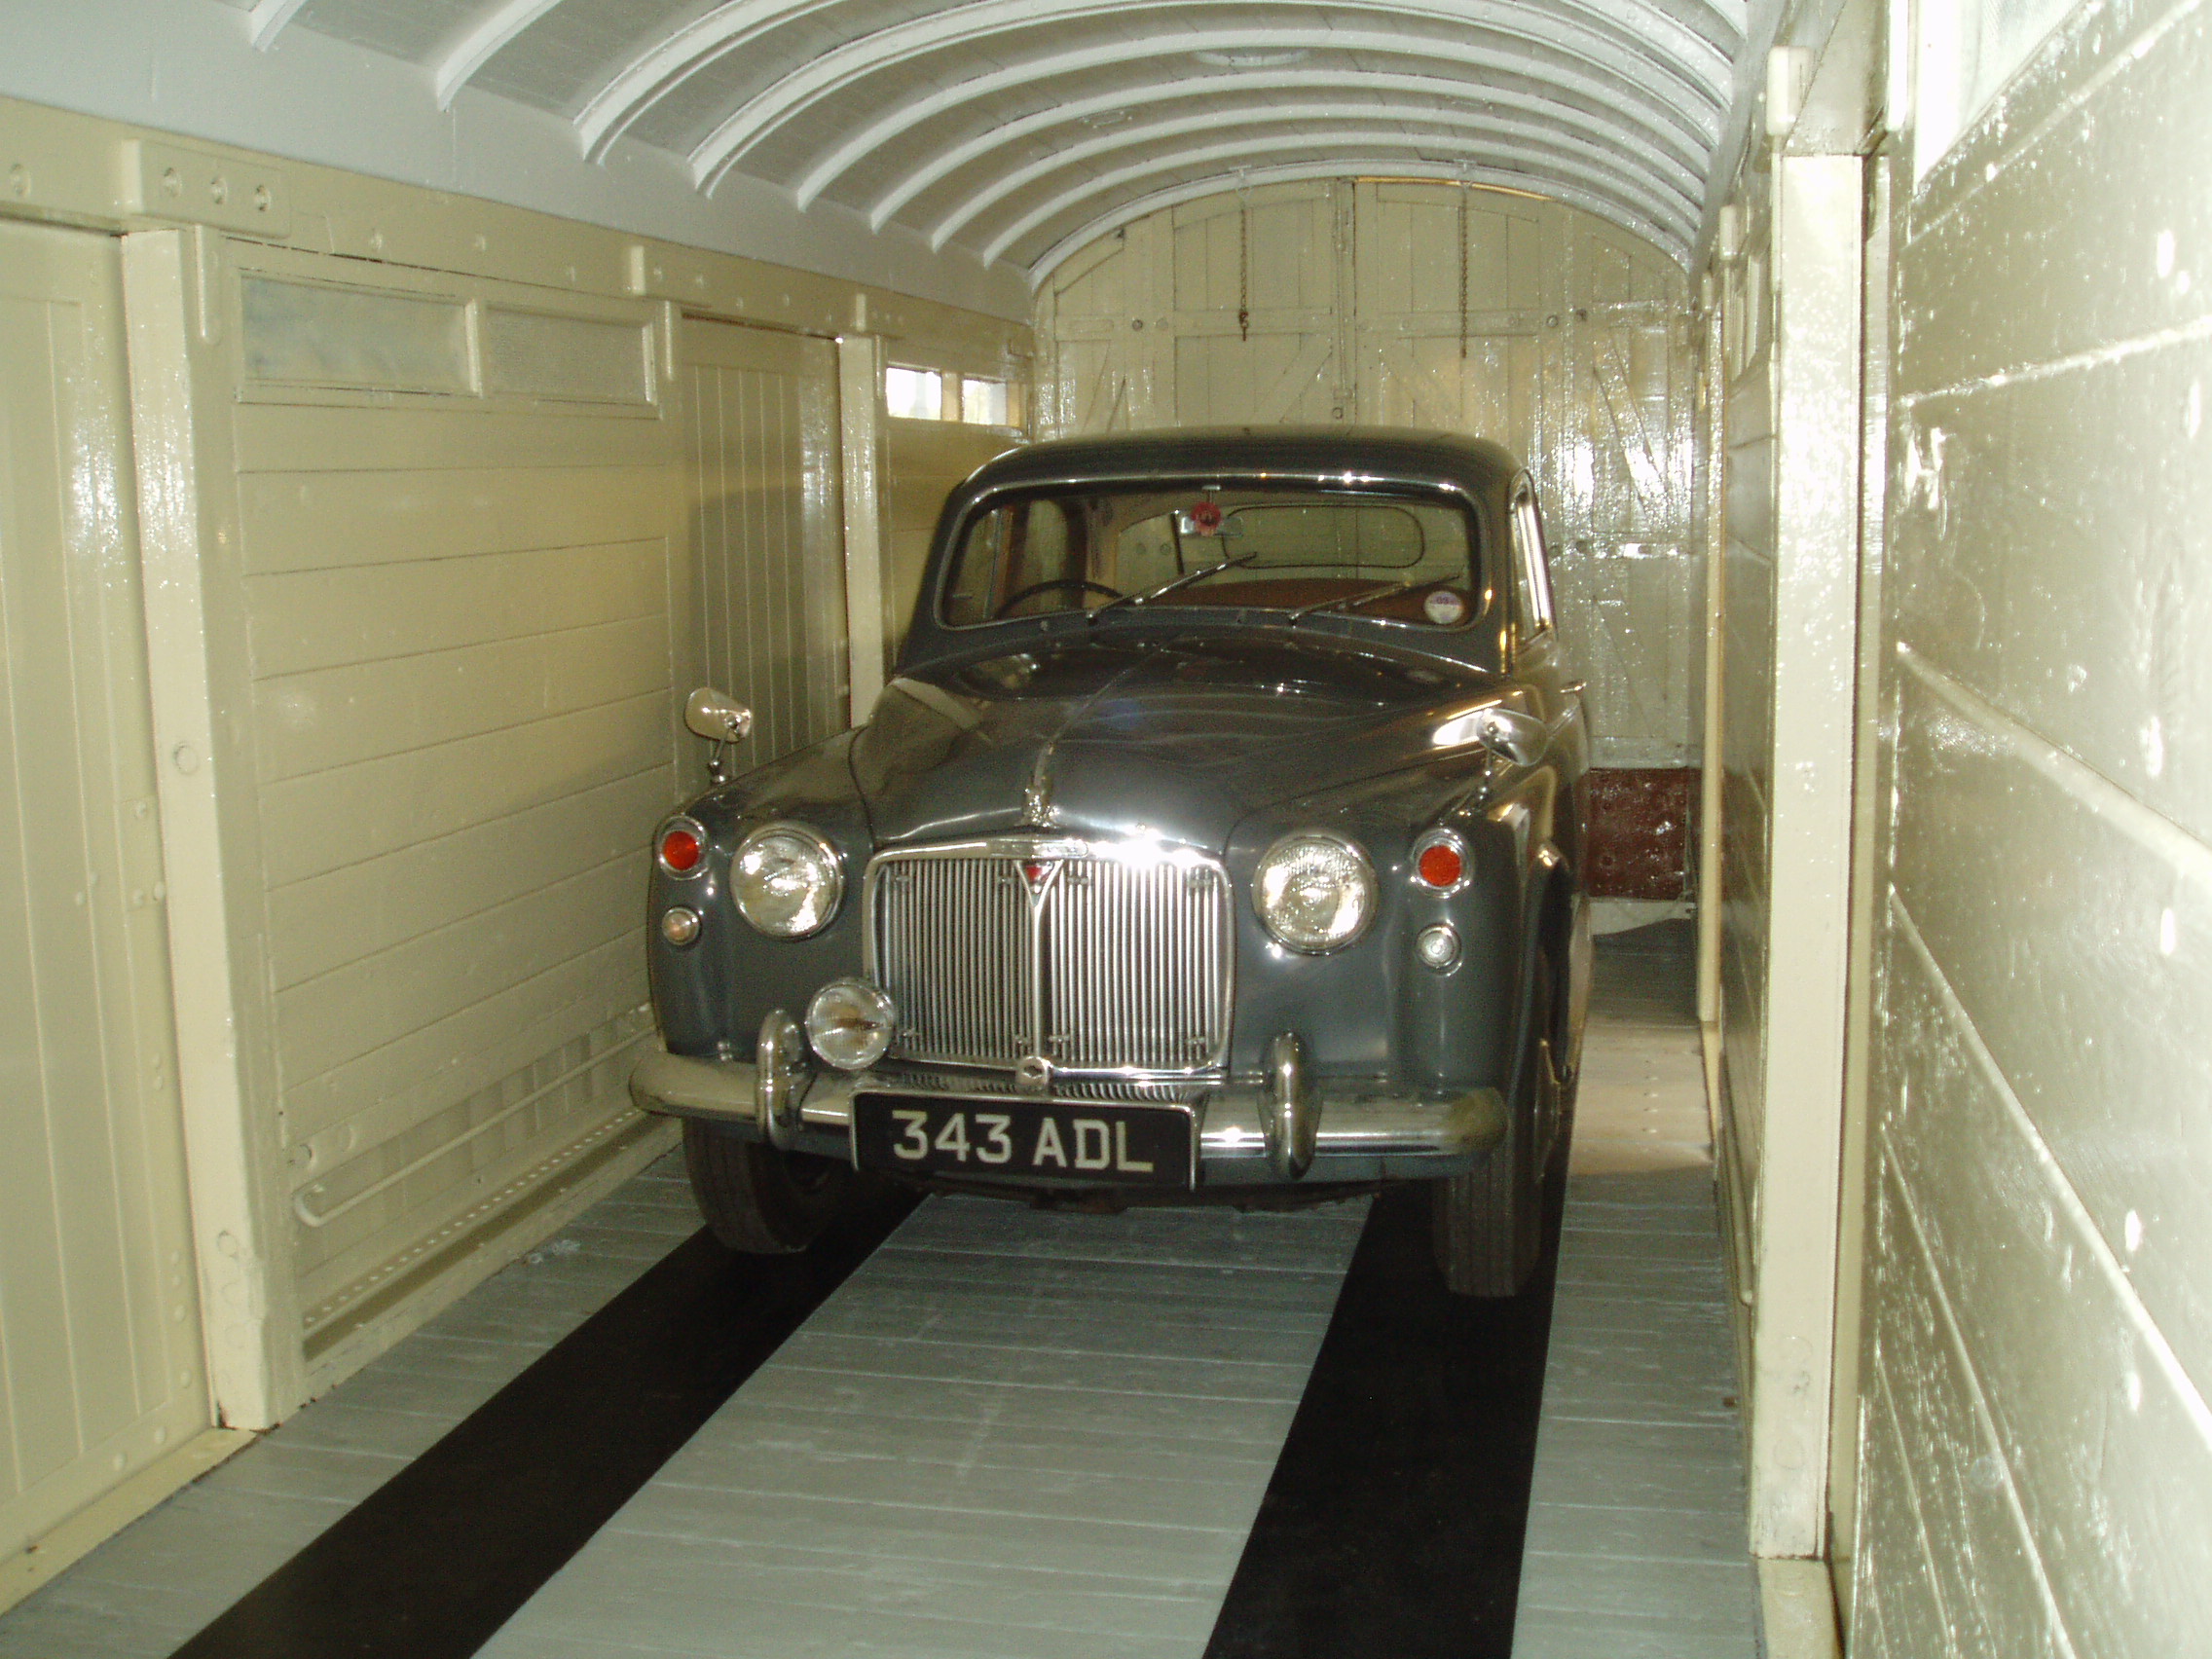 It is 10am and the car is safely positioned in its display position where it will be seen by visitors within the wagon.